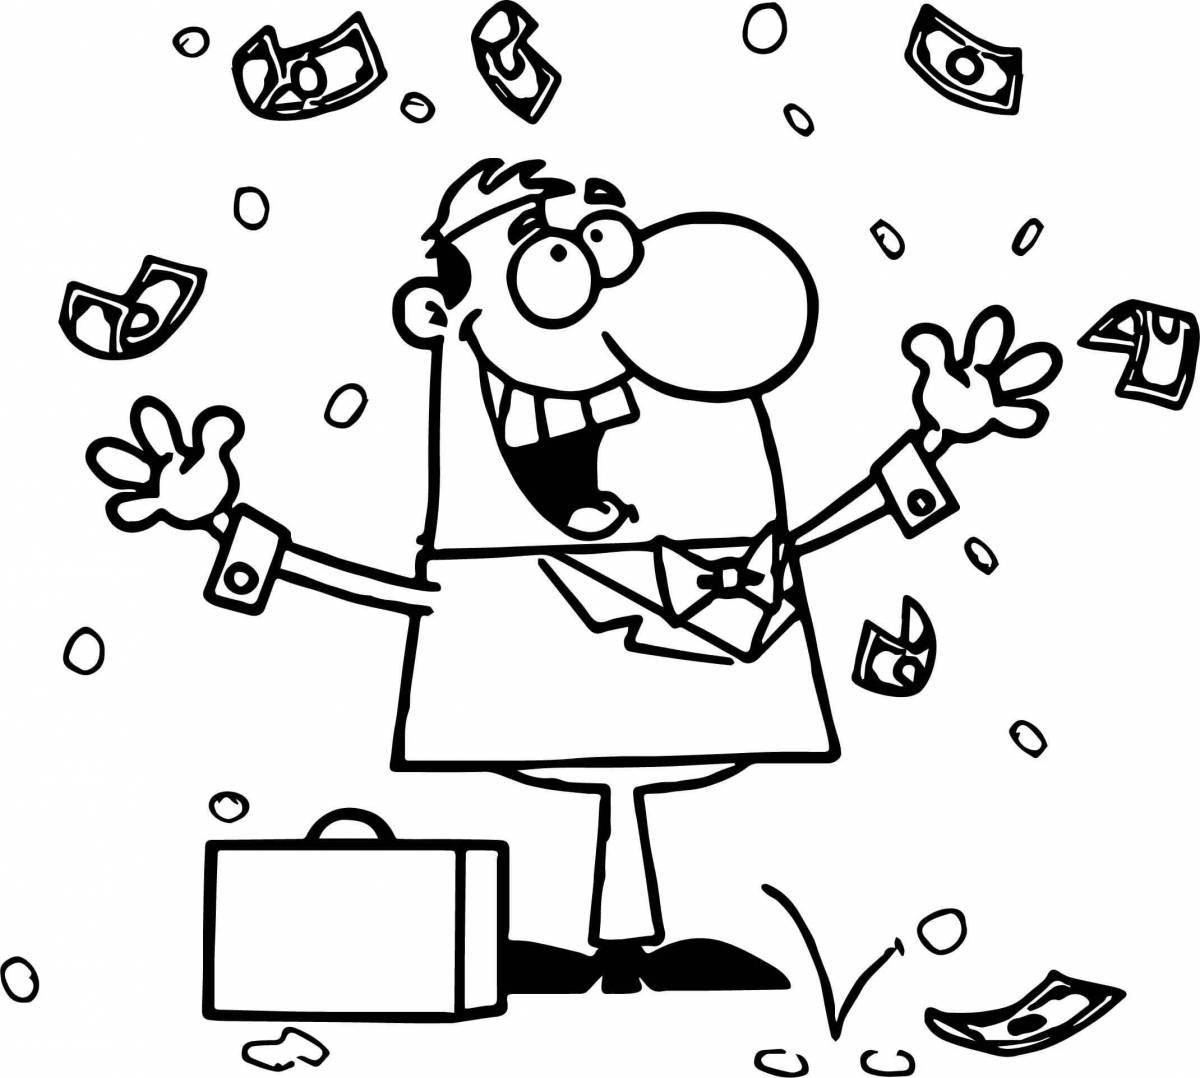 Great mini money coloring page